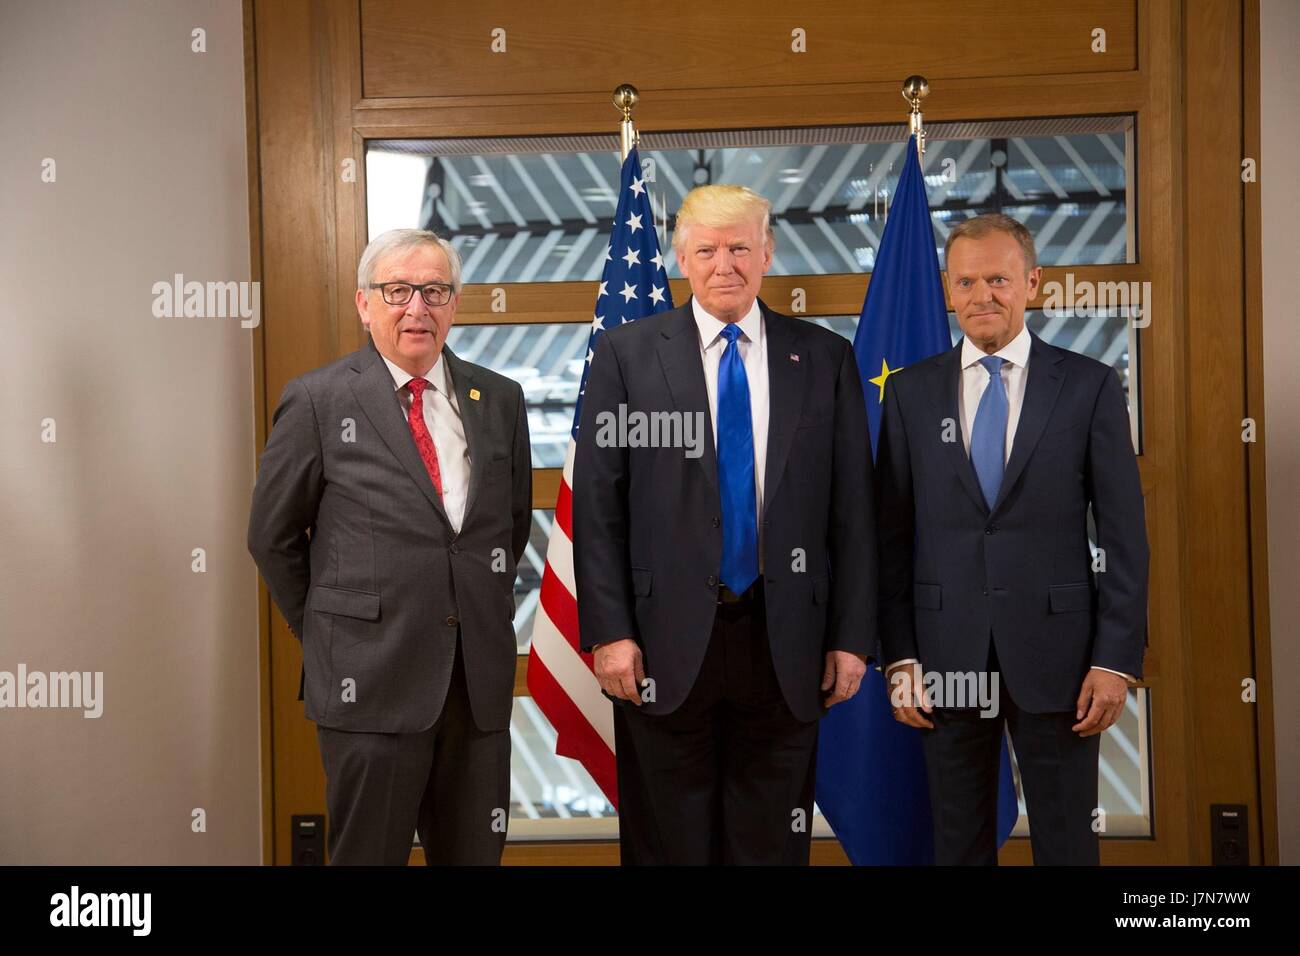 Brussels, Belgium. 25th May, 2017. U.S. President Donald Trump President Donald Trump poses for a photo with European Union President Jean-Claude Juncker, left, and European Council President Donald Tusk, right, prior to the start of their bilateral meeting at the European Union Headquarters May 25, 2017 in Brussels. Credit: Planetpix/Alamy Live News Stock Photo